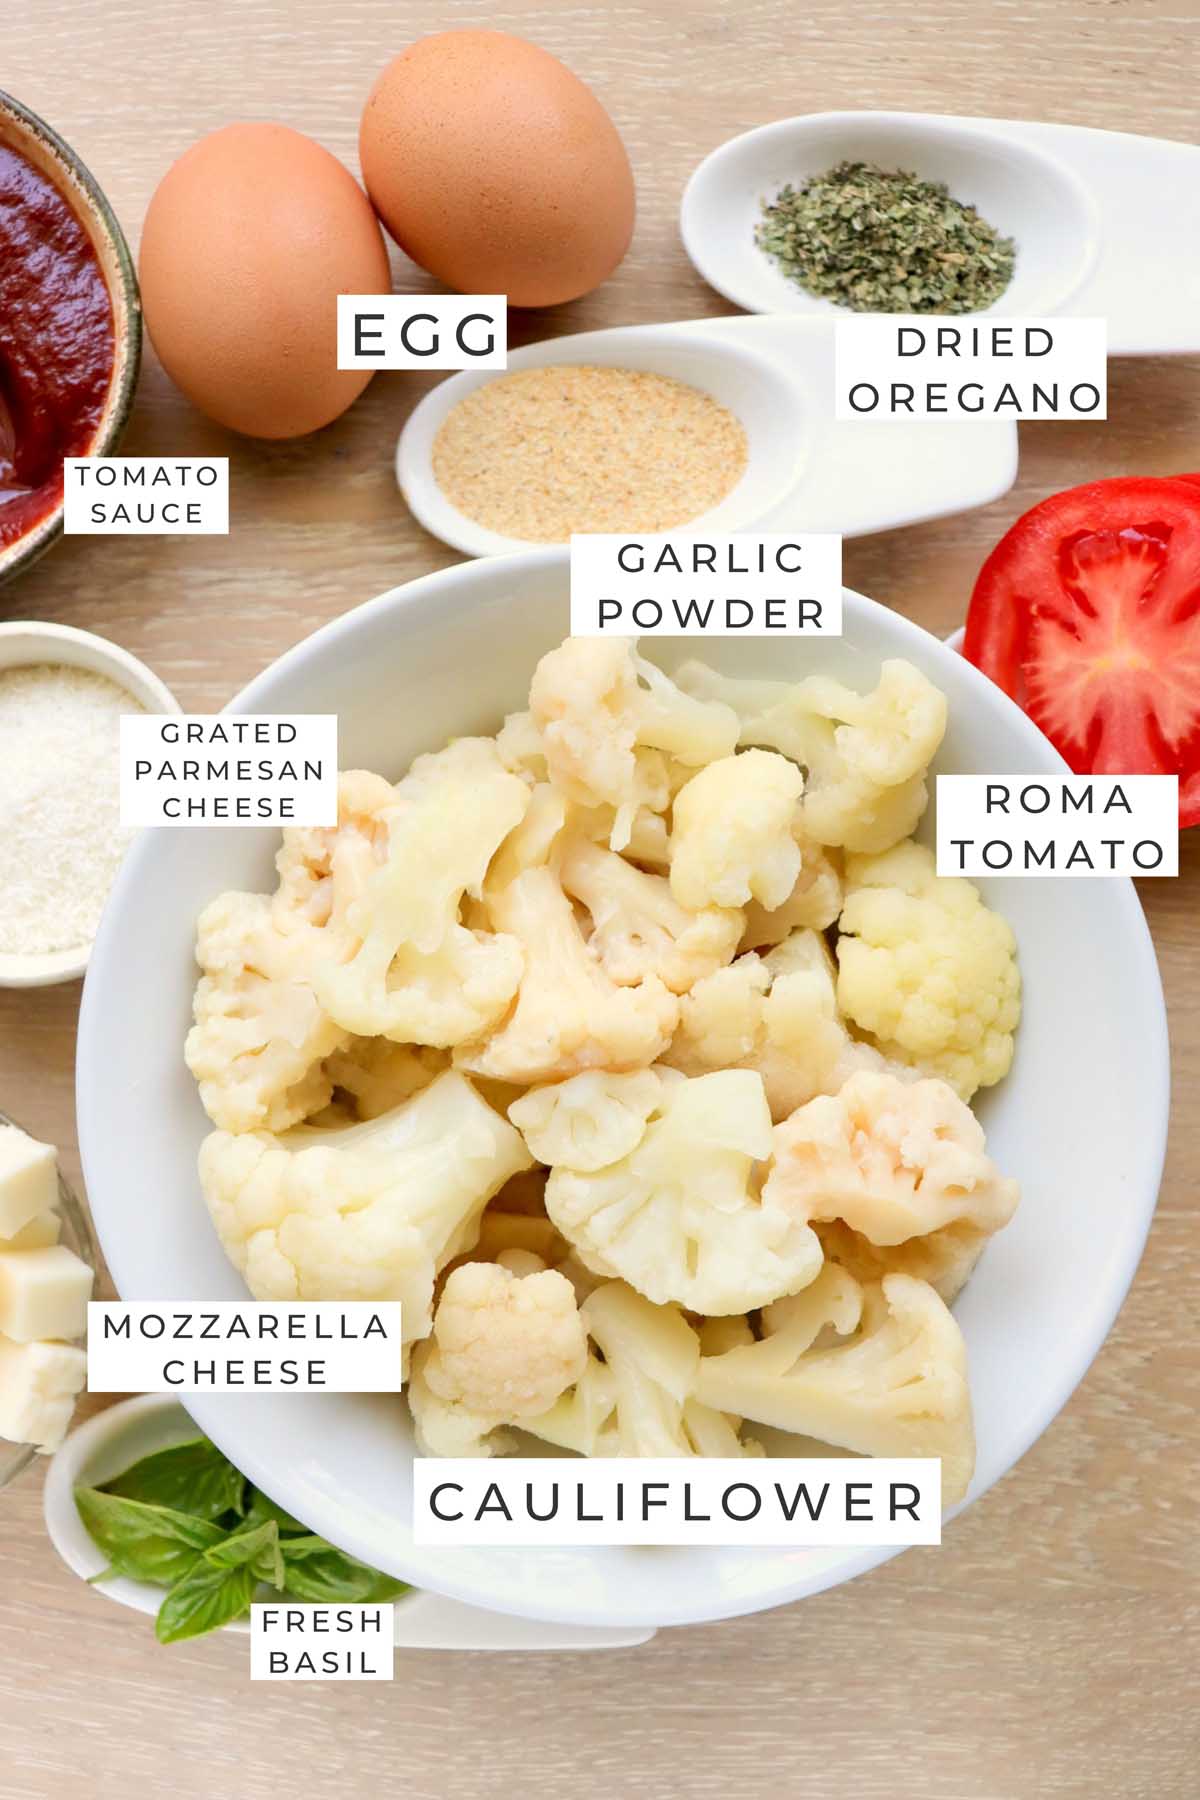 Labeled ingredients for the margherita pizza.